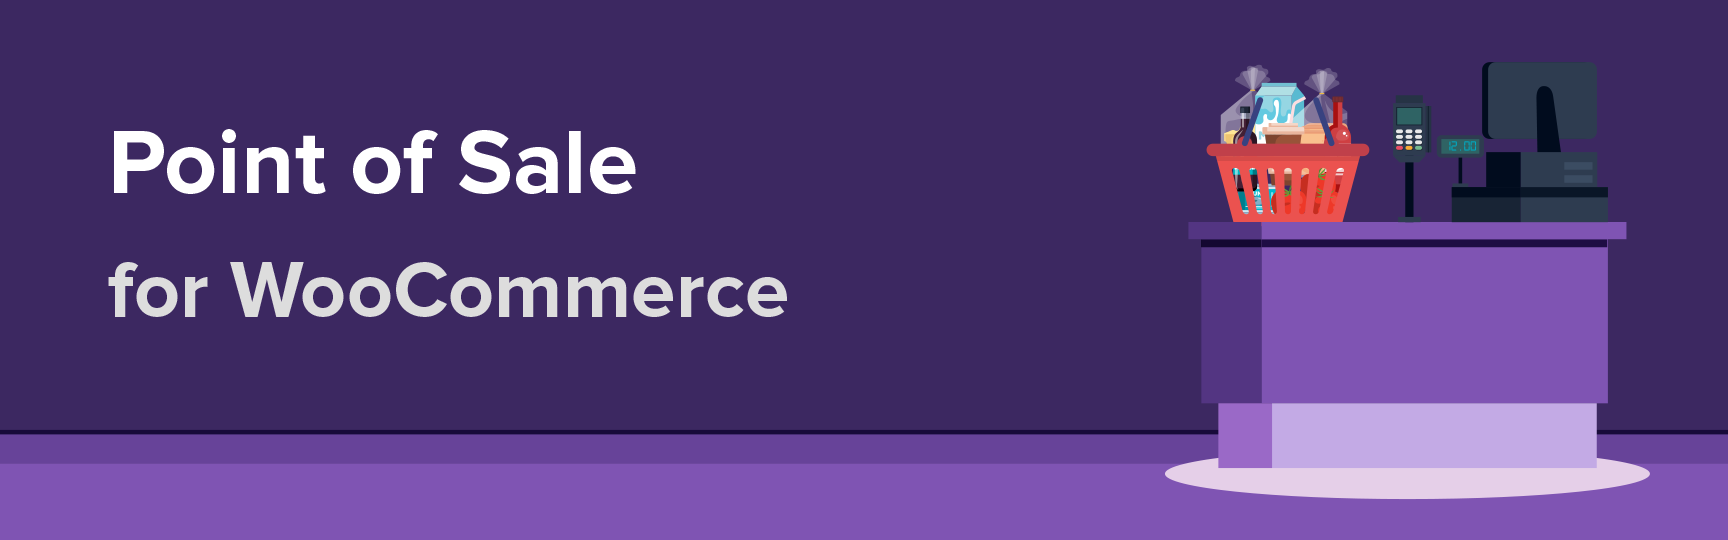 WooCommerce Point of Sale (POS) v6.0.5 GPL Download